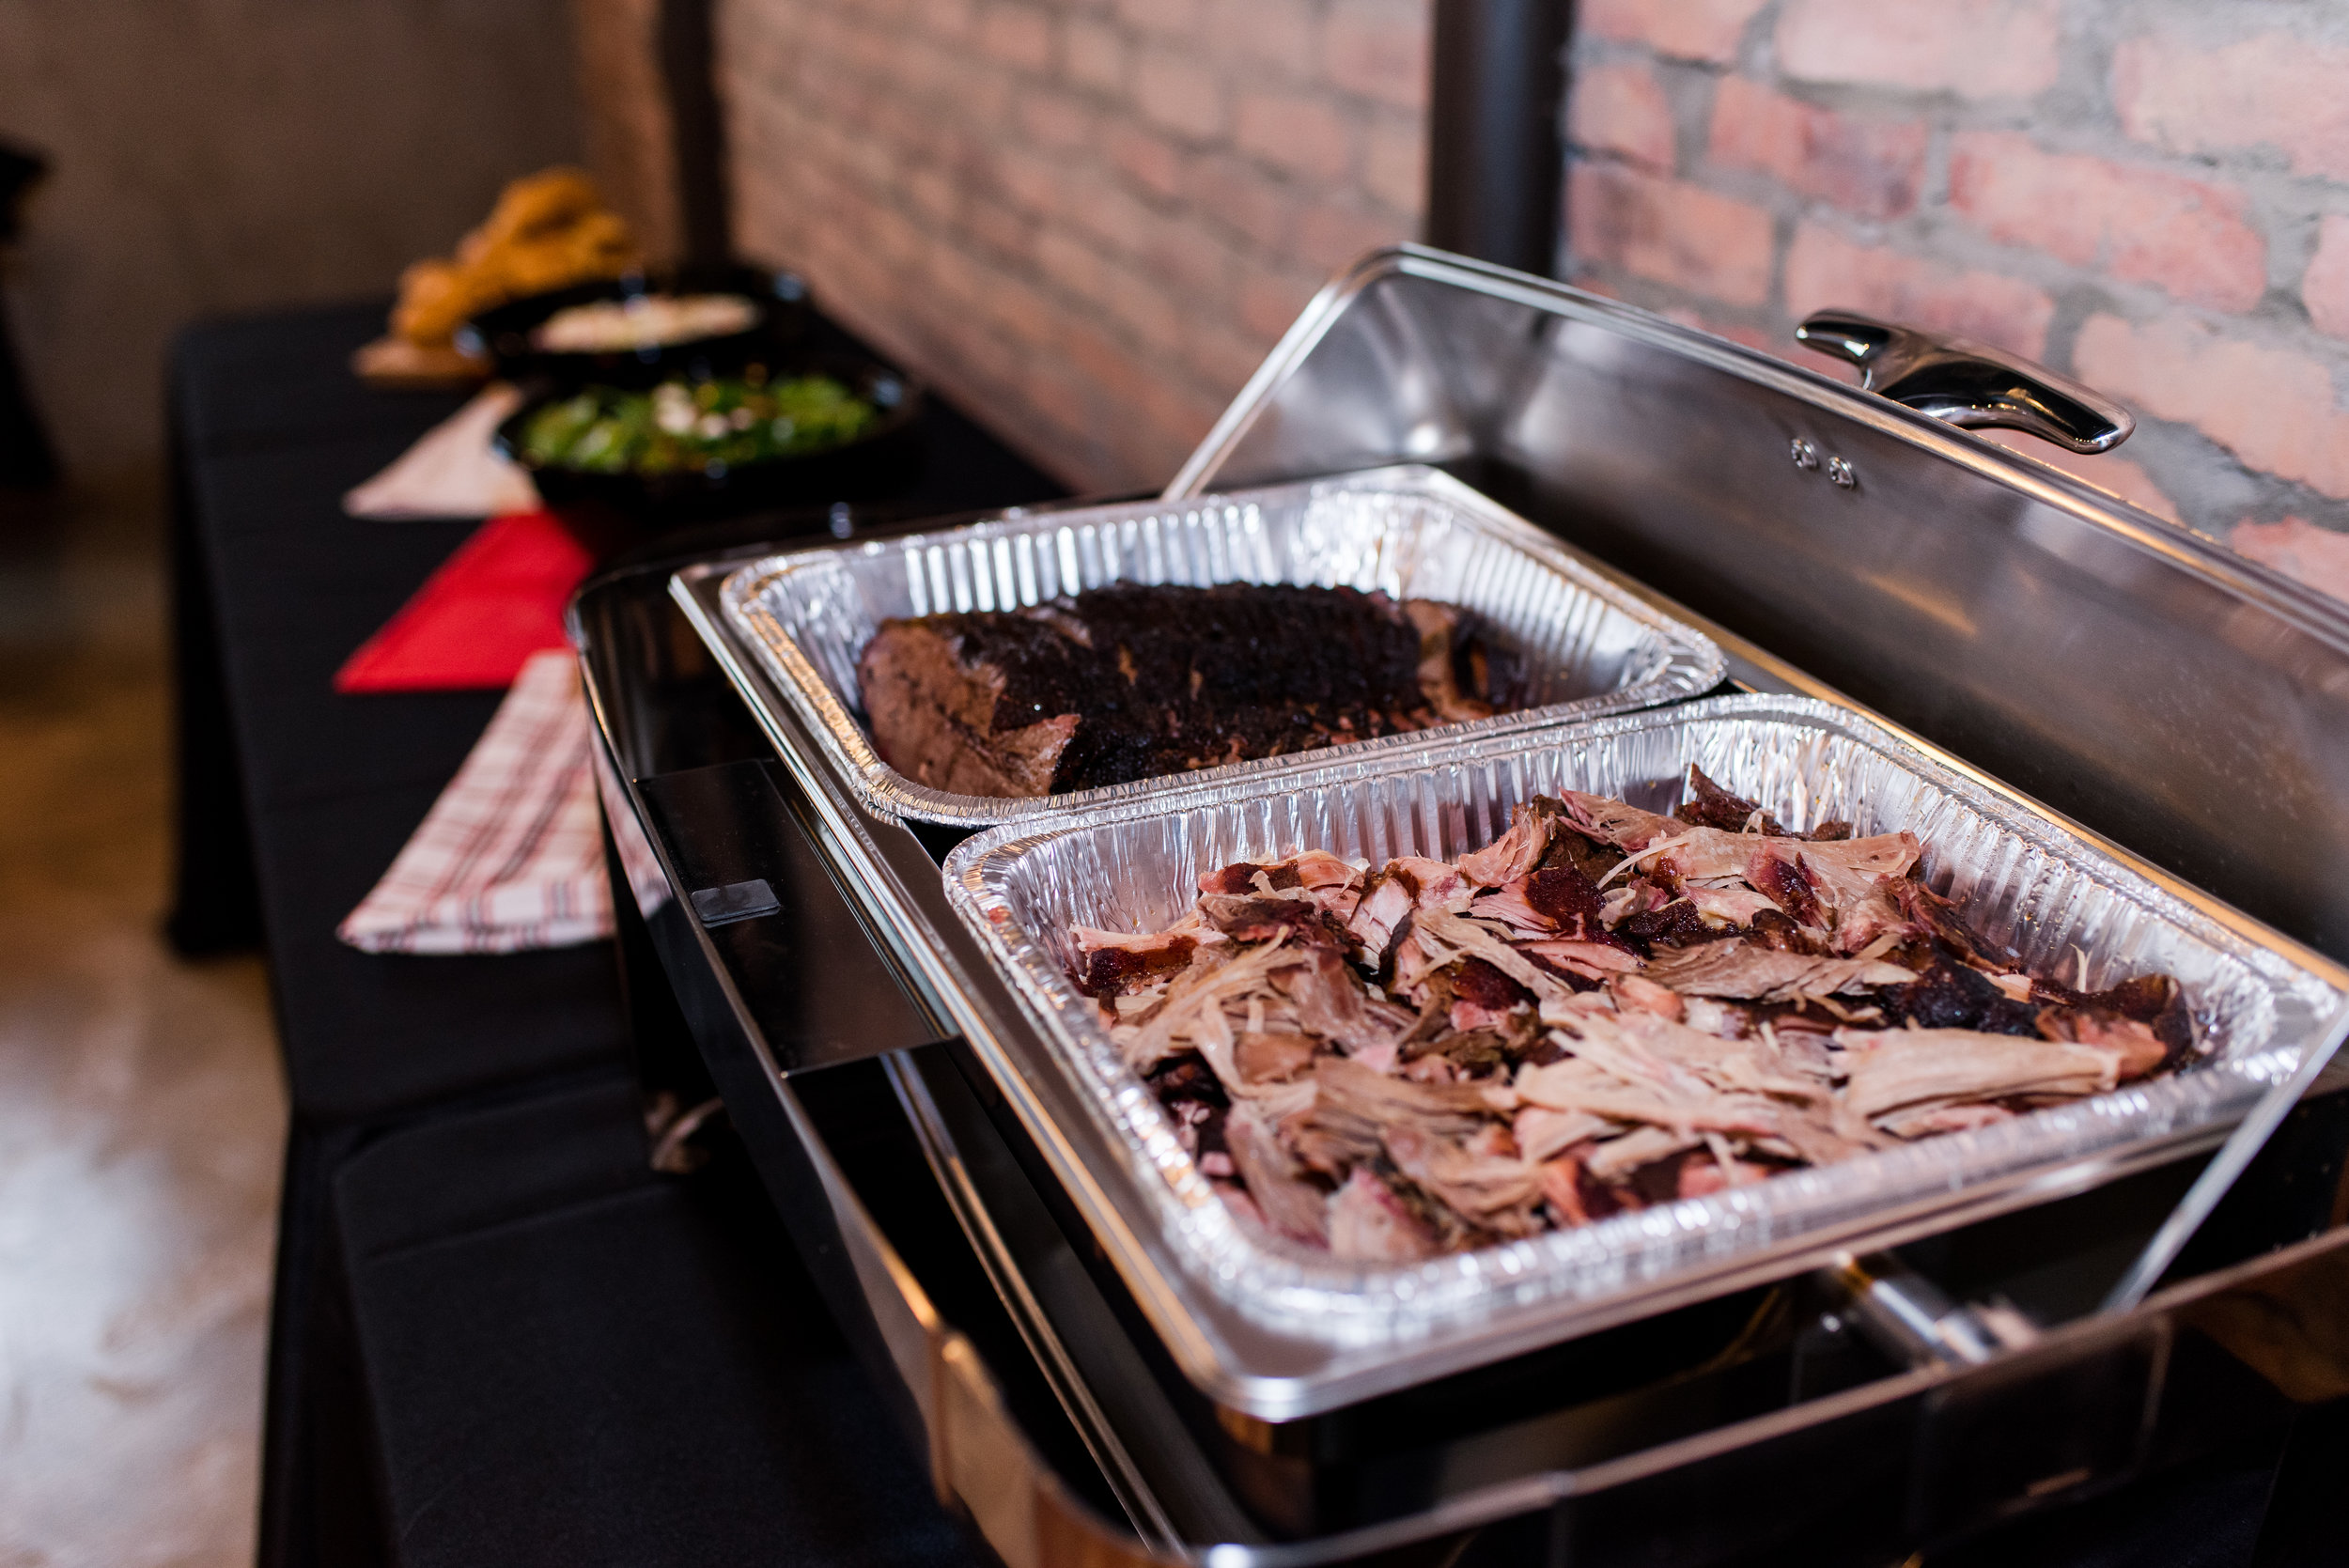 BBQ Catering Buffet - Smoked Brisket - Moses Lake Washington Wedding Caterer - BBQ Catering - Smulligan's BBQ Moses Lake, Washington